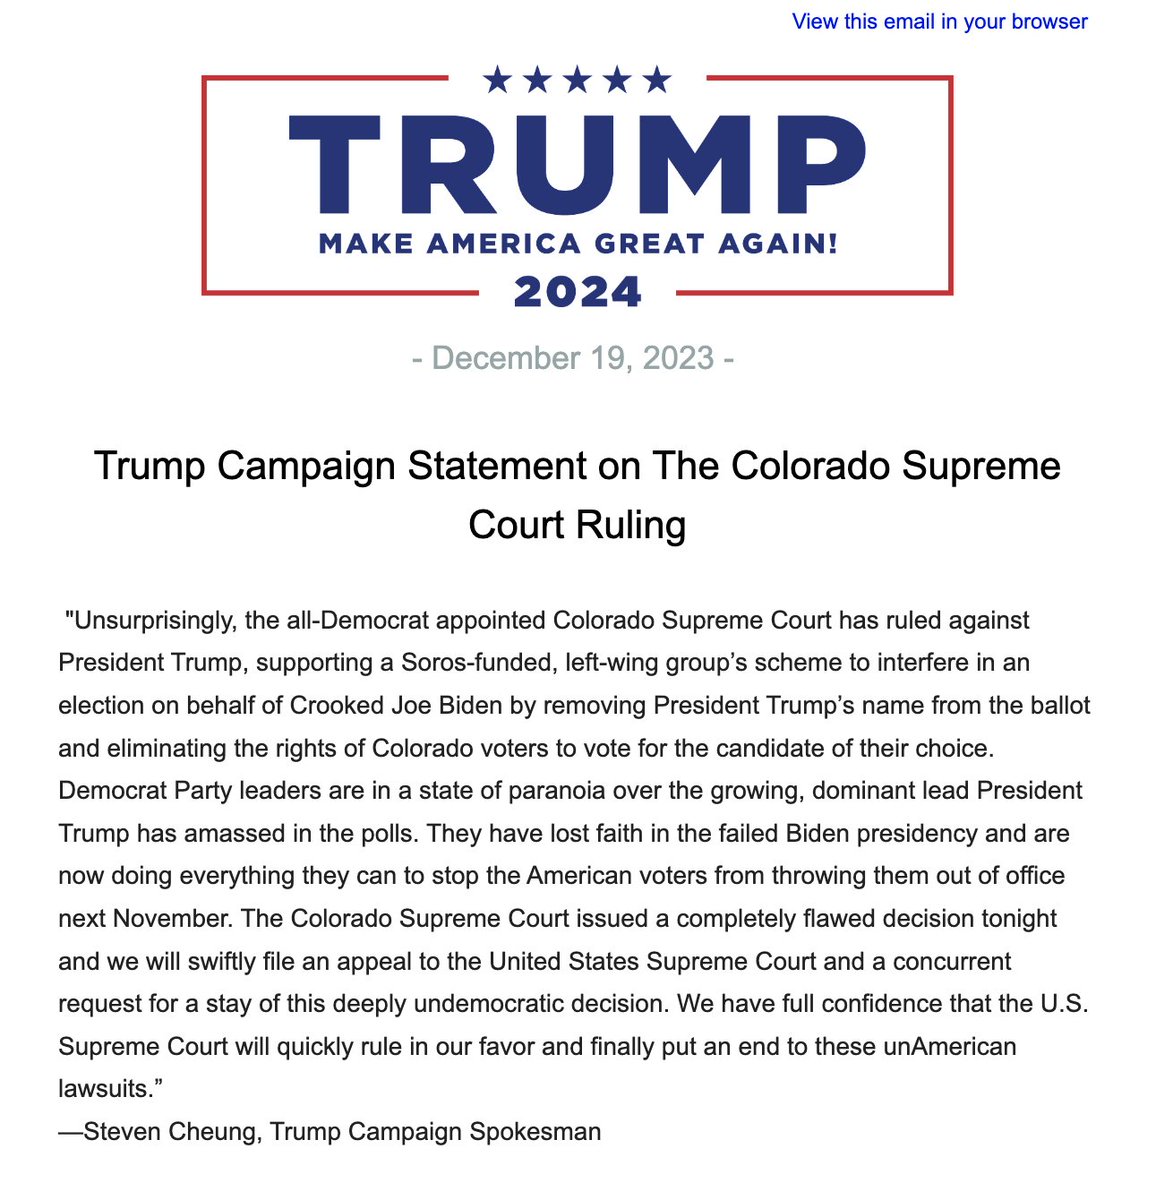 NOW: Trump's response to being kicked off the ballot in Colorado . . . He will 'swiftly file an appeal' to the U.S. Supreme Court.